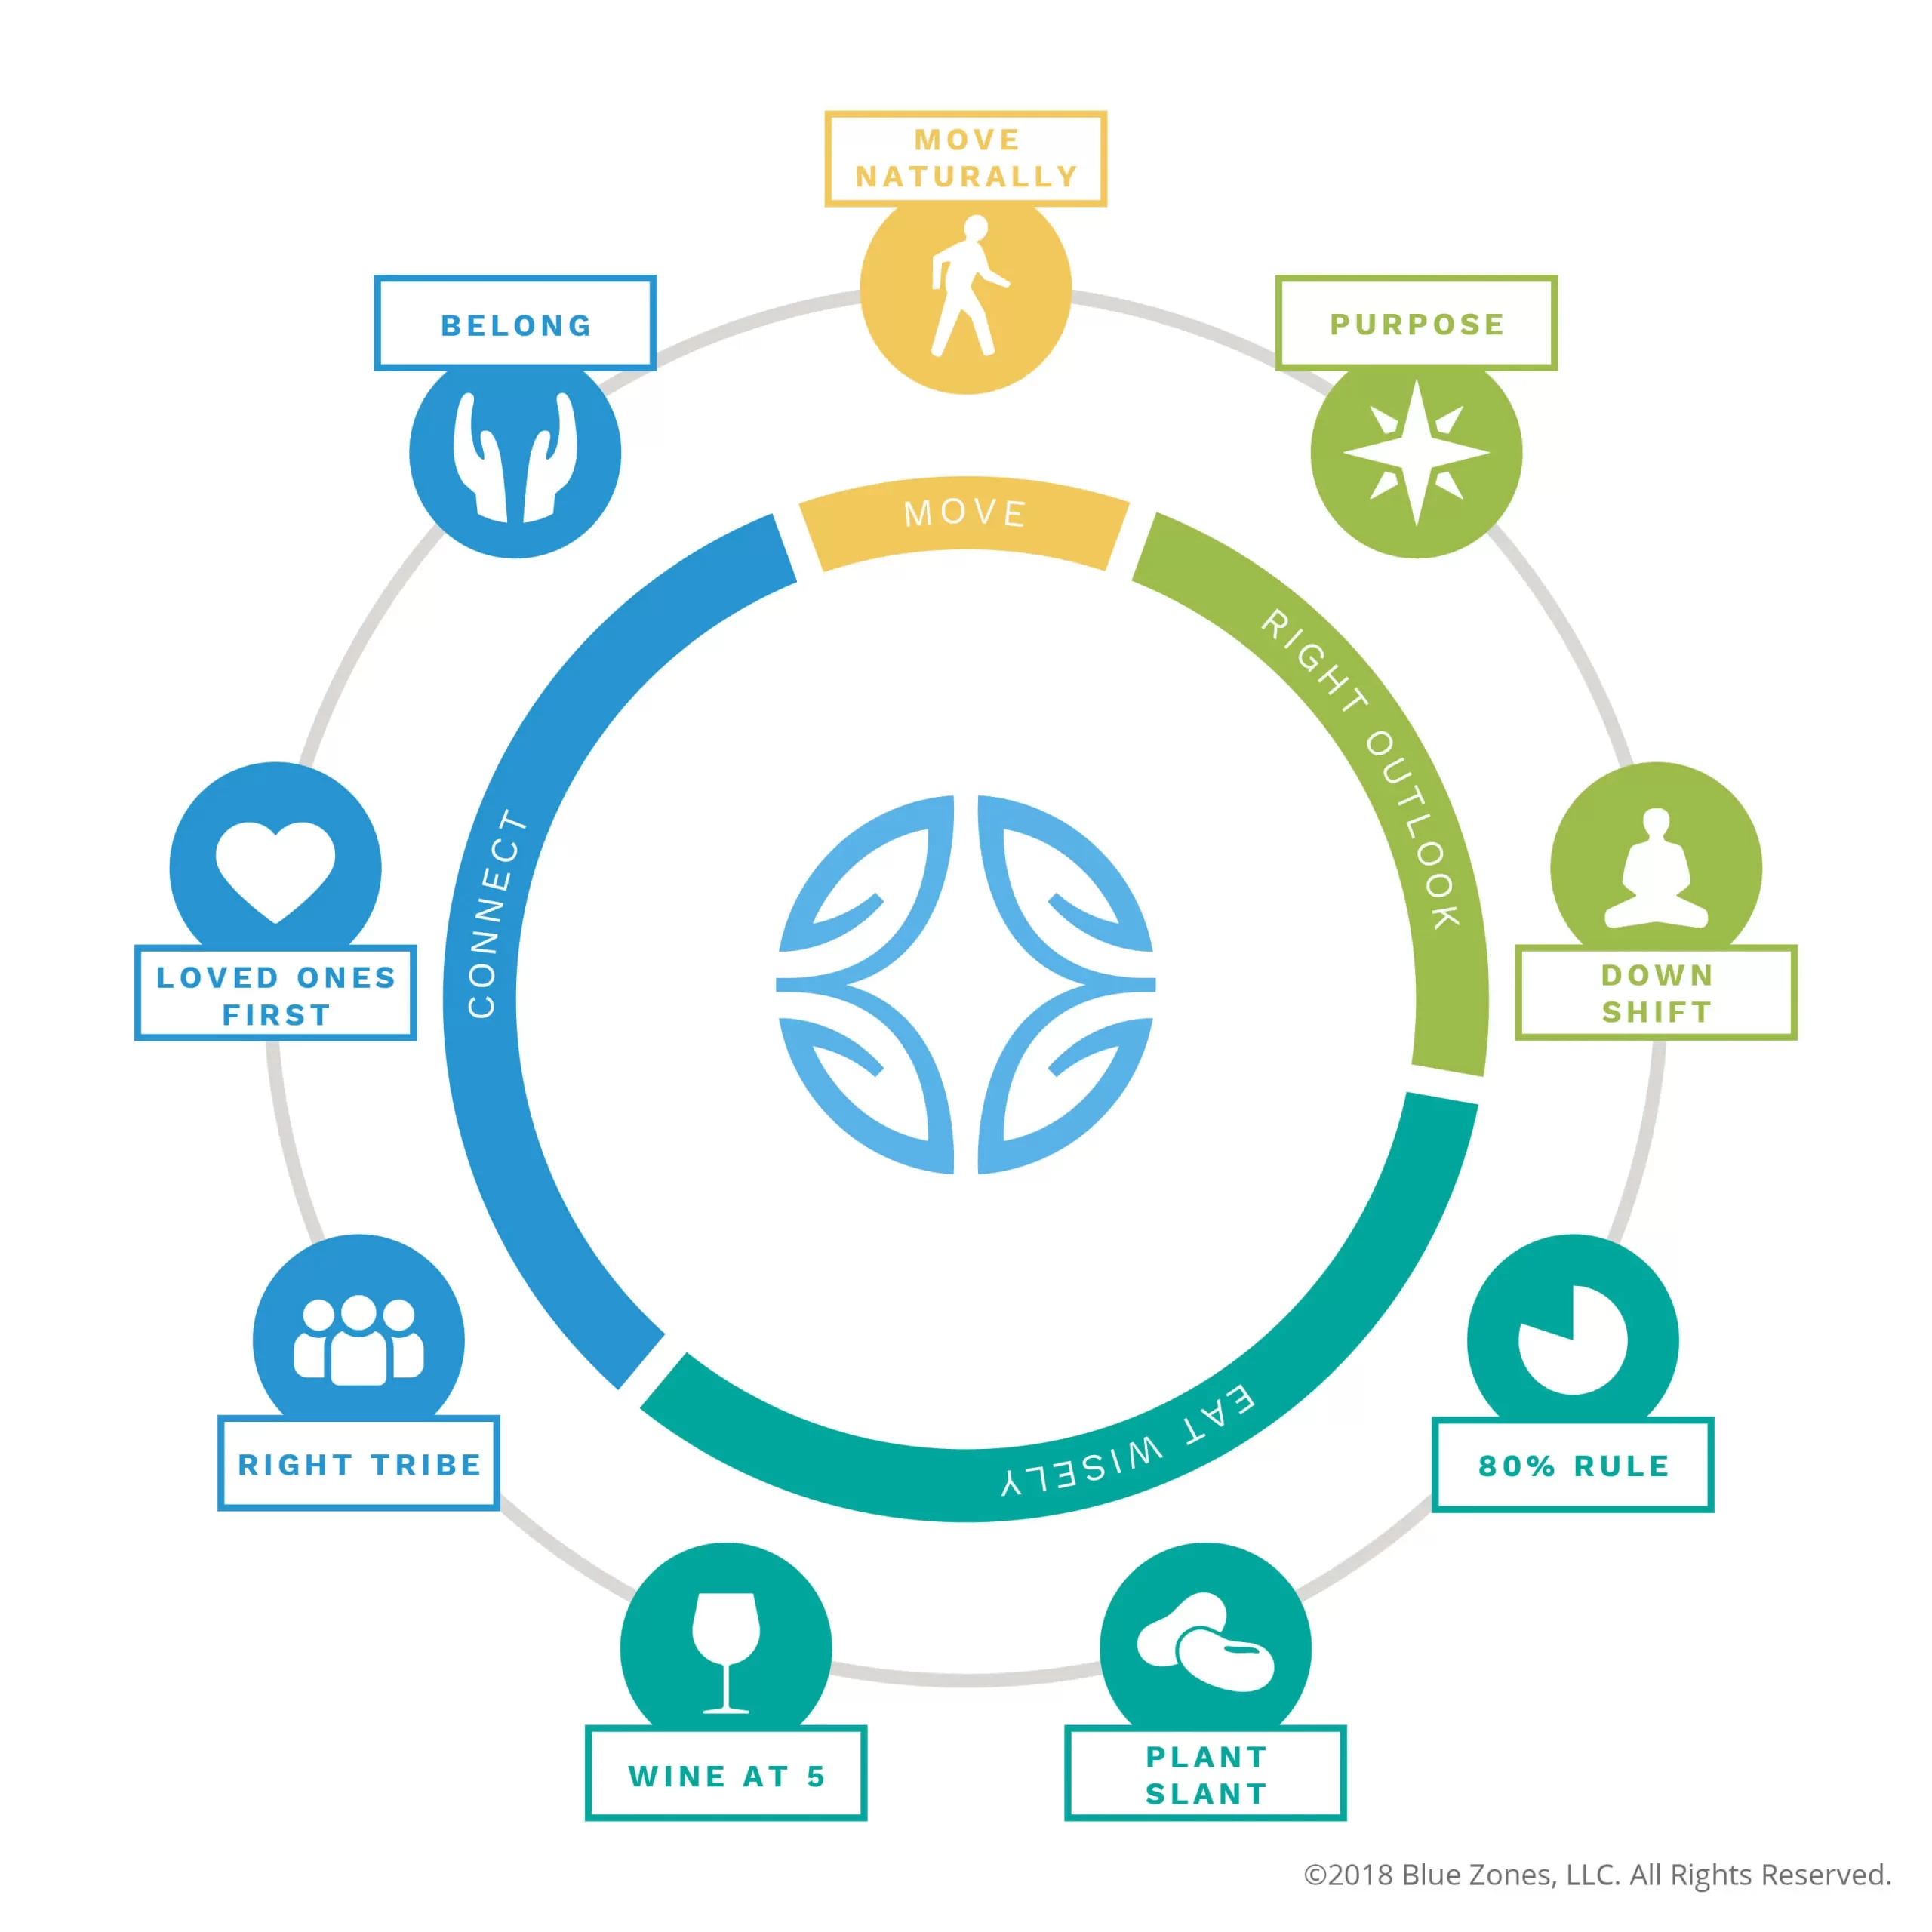 Infographic of the 'Power 9' principles from Blue Zones, illustrating lifestyle habits for longevity with icons for natural movement, purpose, stress reduction, eating moderately, plant-based diet, moderate wine consumption, community involvement, family first, and healthy social circles. These principles are interconnected, showing a holistic approach to health and longevity, with a central emblem that ties them all together, emphasizing the connection between these lifestyle choices. The image is clearly labeled and easy to understand, with a clean and simple design. The copyright notice "©2018 Blue Zones, LLC. All Rights Reserved." is present at the bottom.